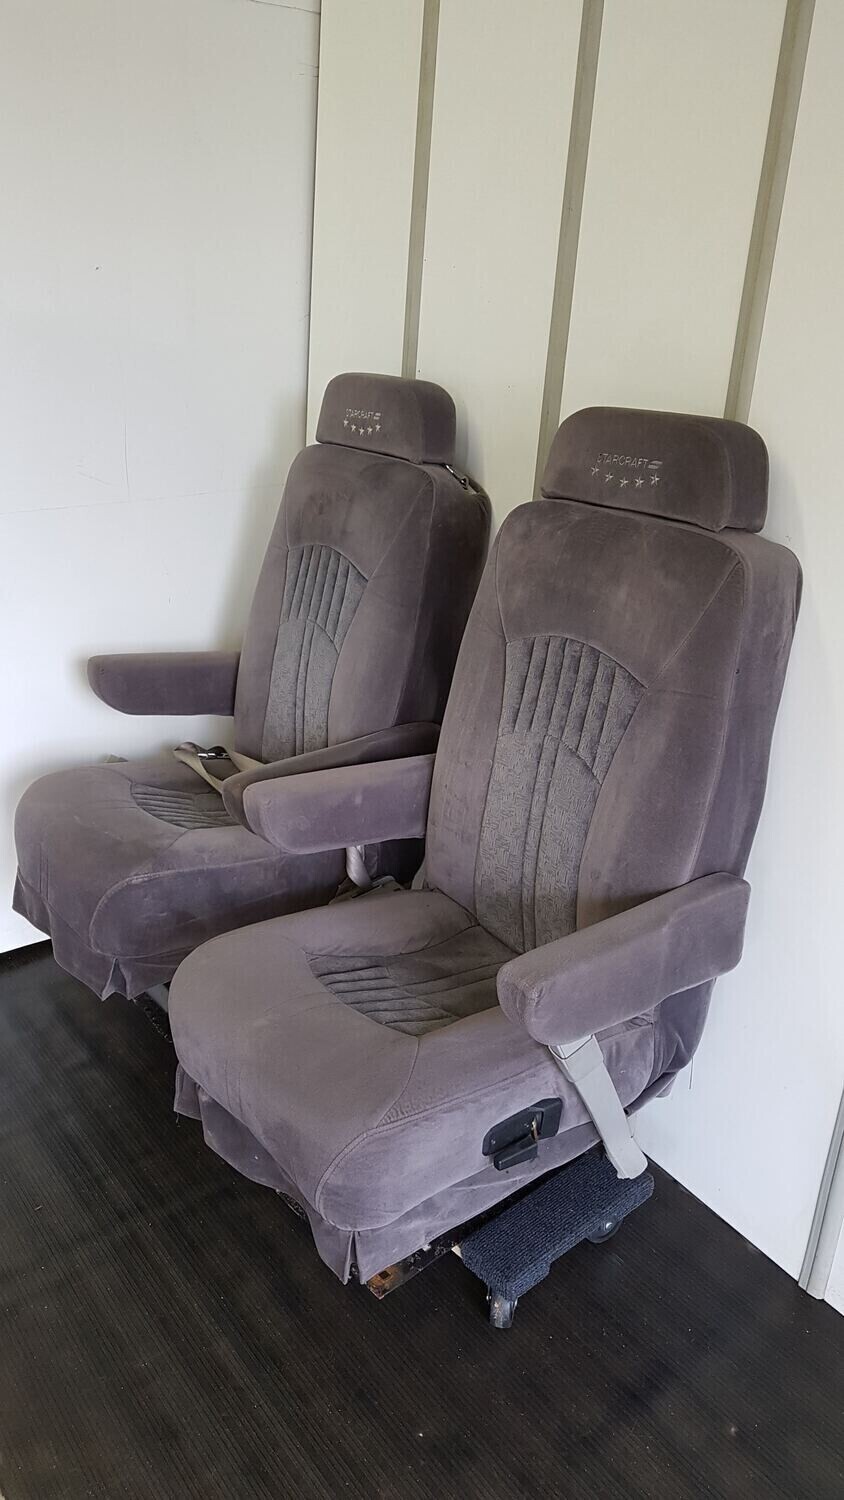 Swivel & Removable Seats for RVs